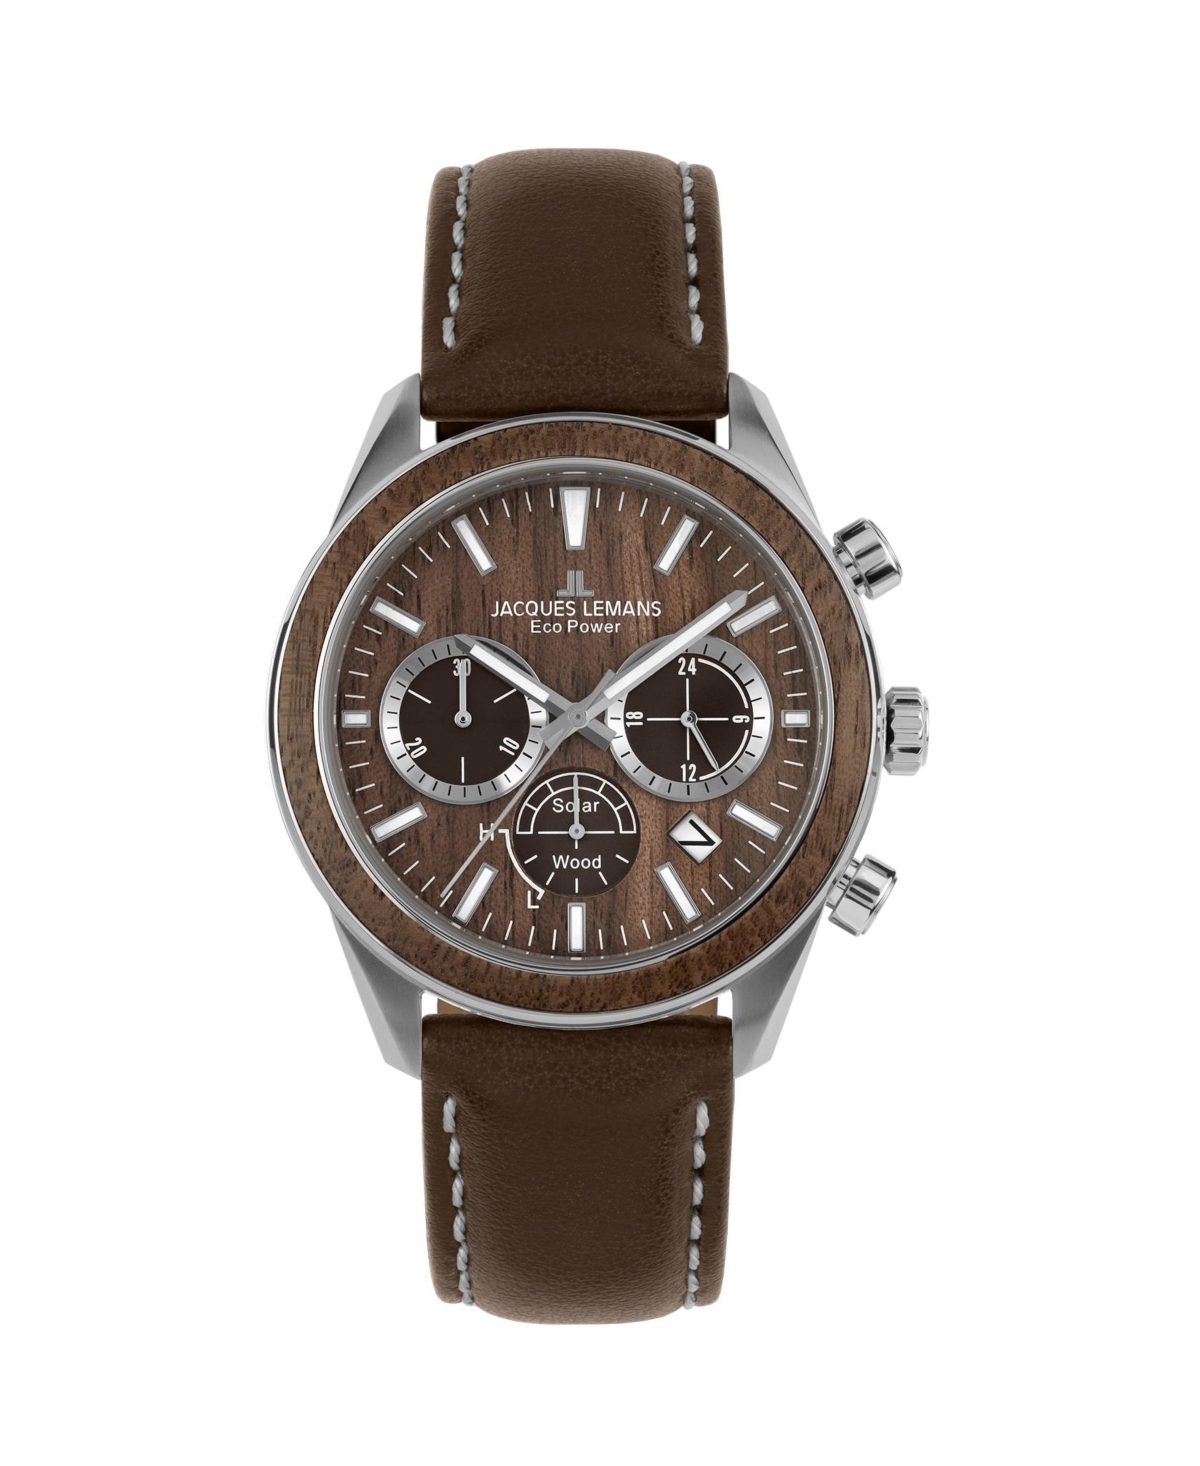 Men's Eco Power Watch with Apple skin Strap and Solid Stainless Steel , Chronograph - Brown